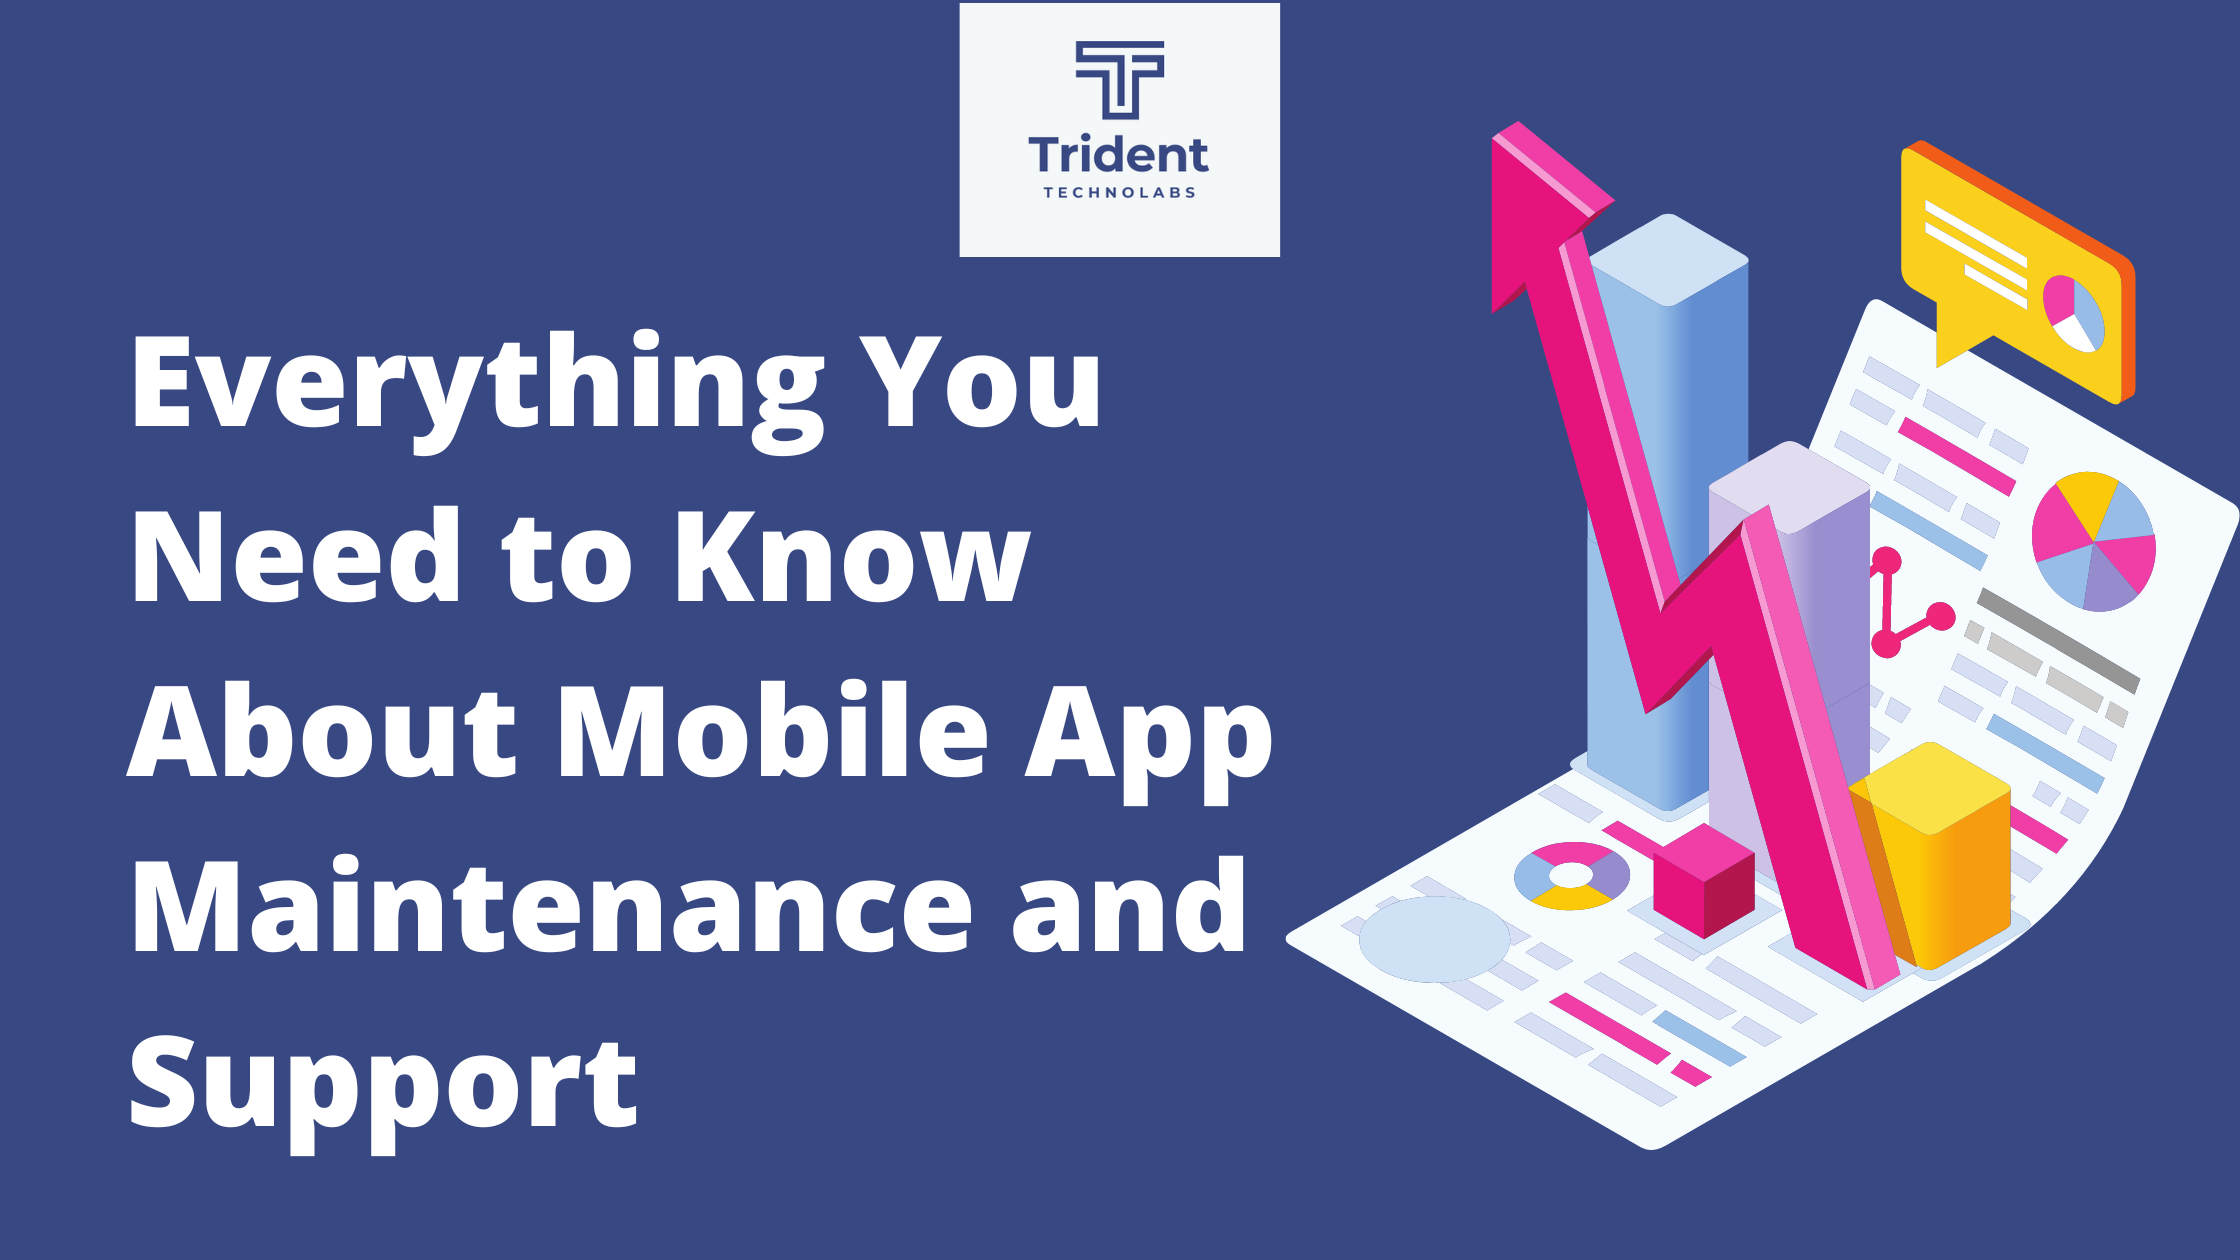 Everything-You-Need-to-Know-About-Mobile-App-Maintenance-and-Support 